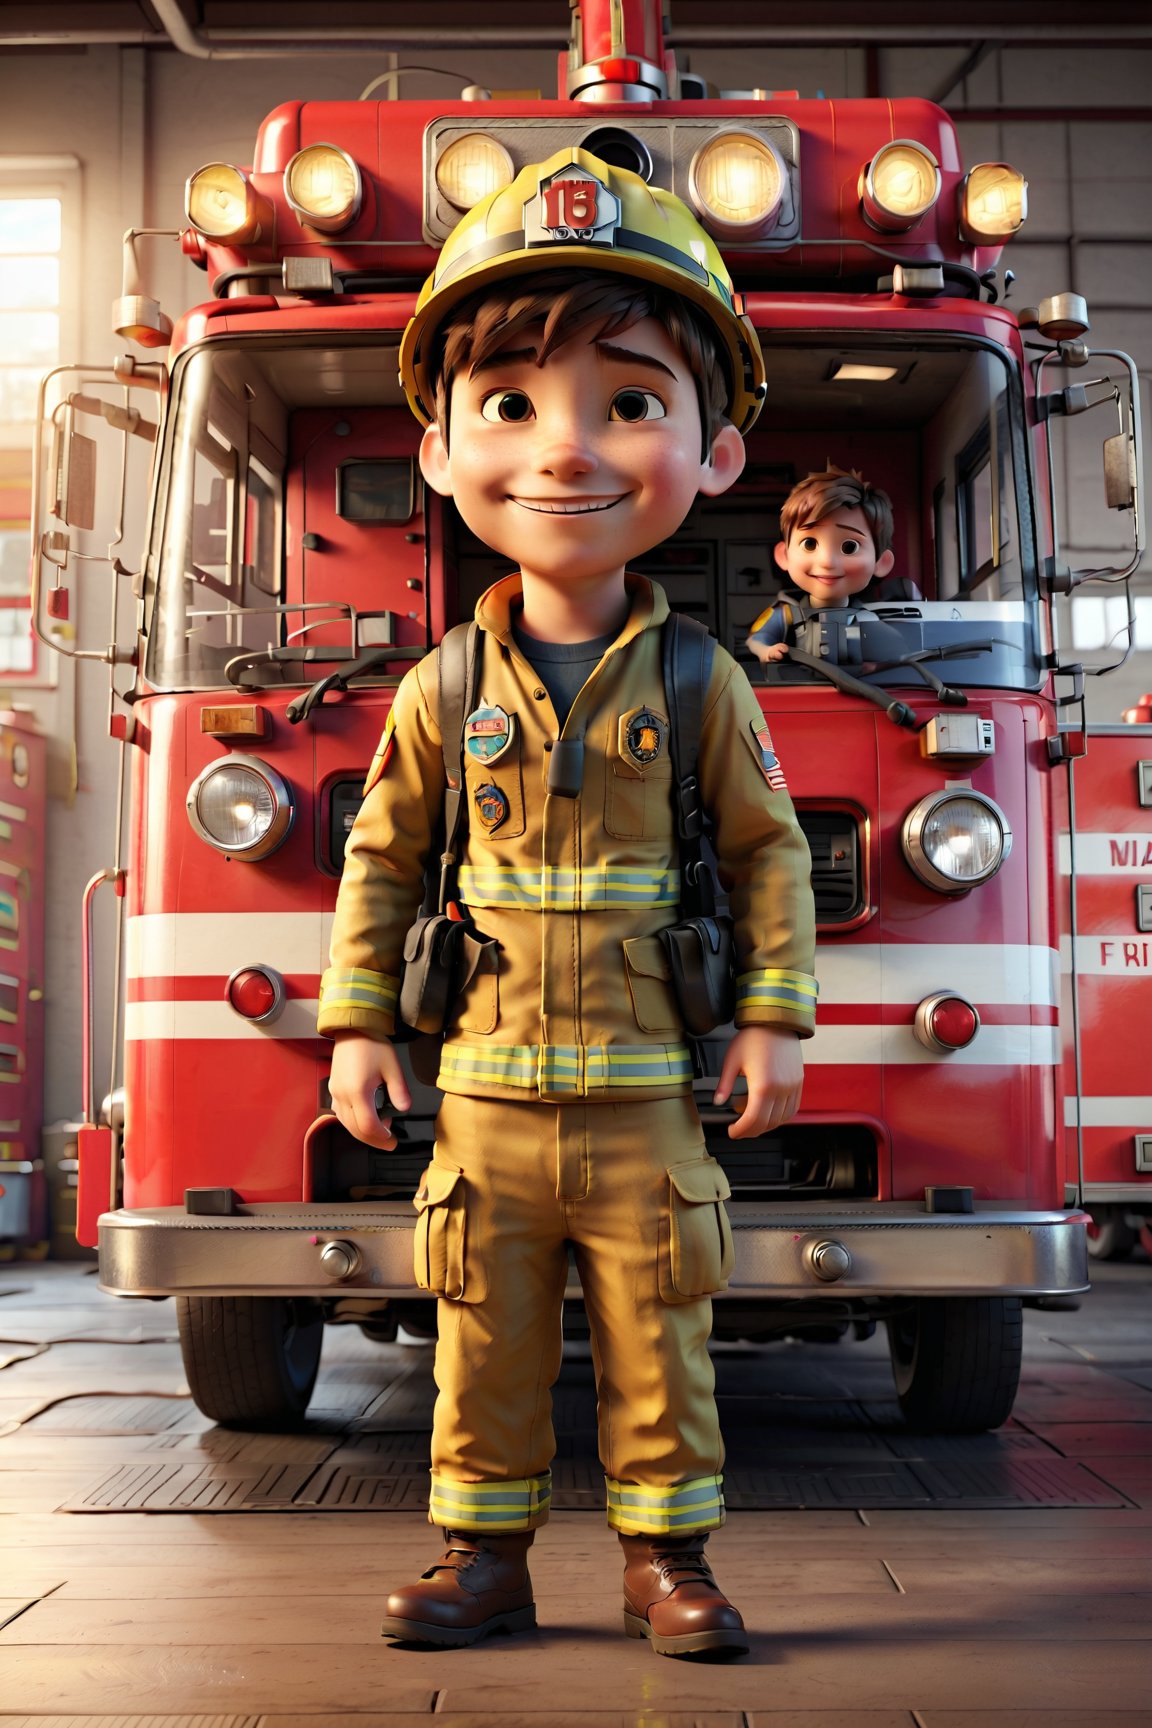 Draw Nico, ultra detailed American boy, slim, super cute, smiling, brown straight short hair, brown expressive dreamer eyes, wearing firefighter uniform, in a fire station with a fire truck, full body, hi definition, 32k resolution, “best quality”, “masterpiece" Full body, focus on face, dimple in cheek, best quality face, full body, 3d, chibi pixar style.

